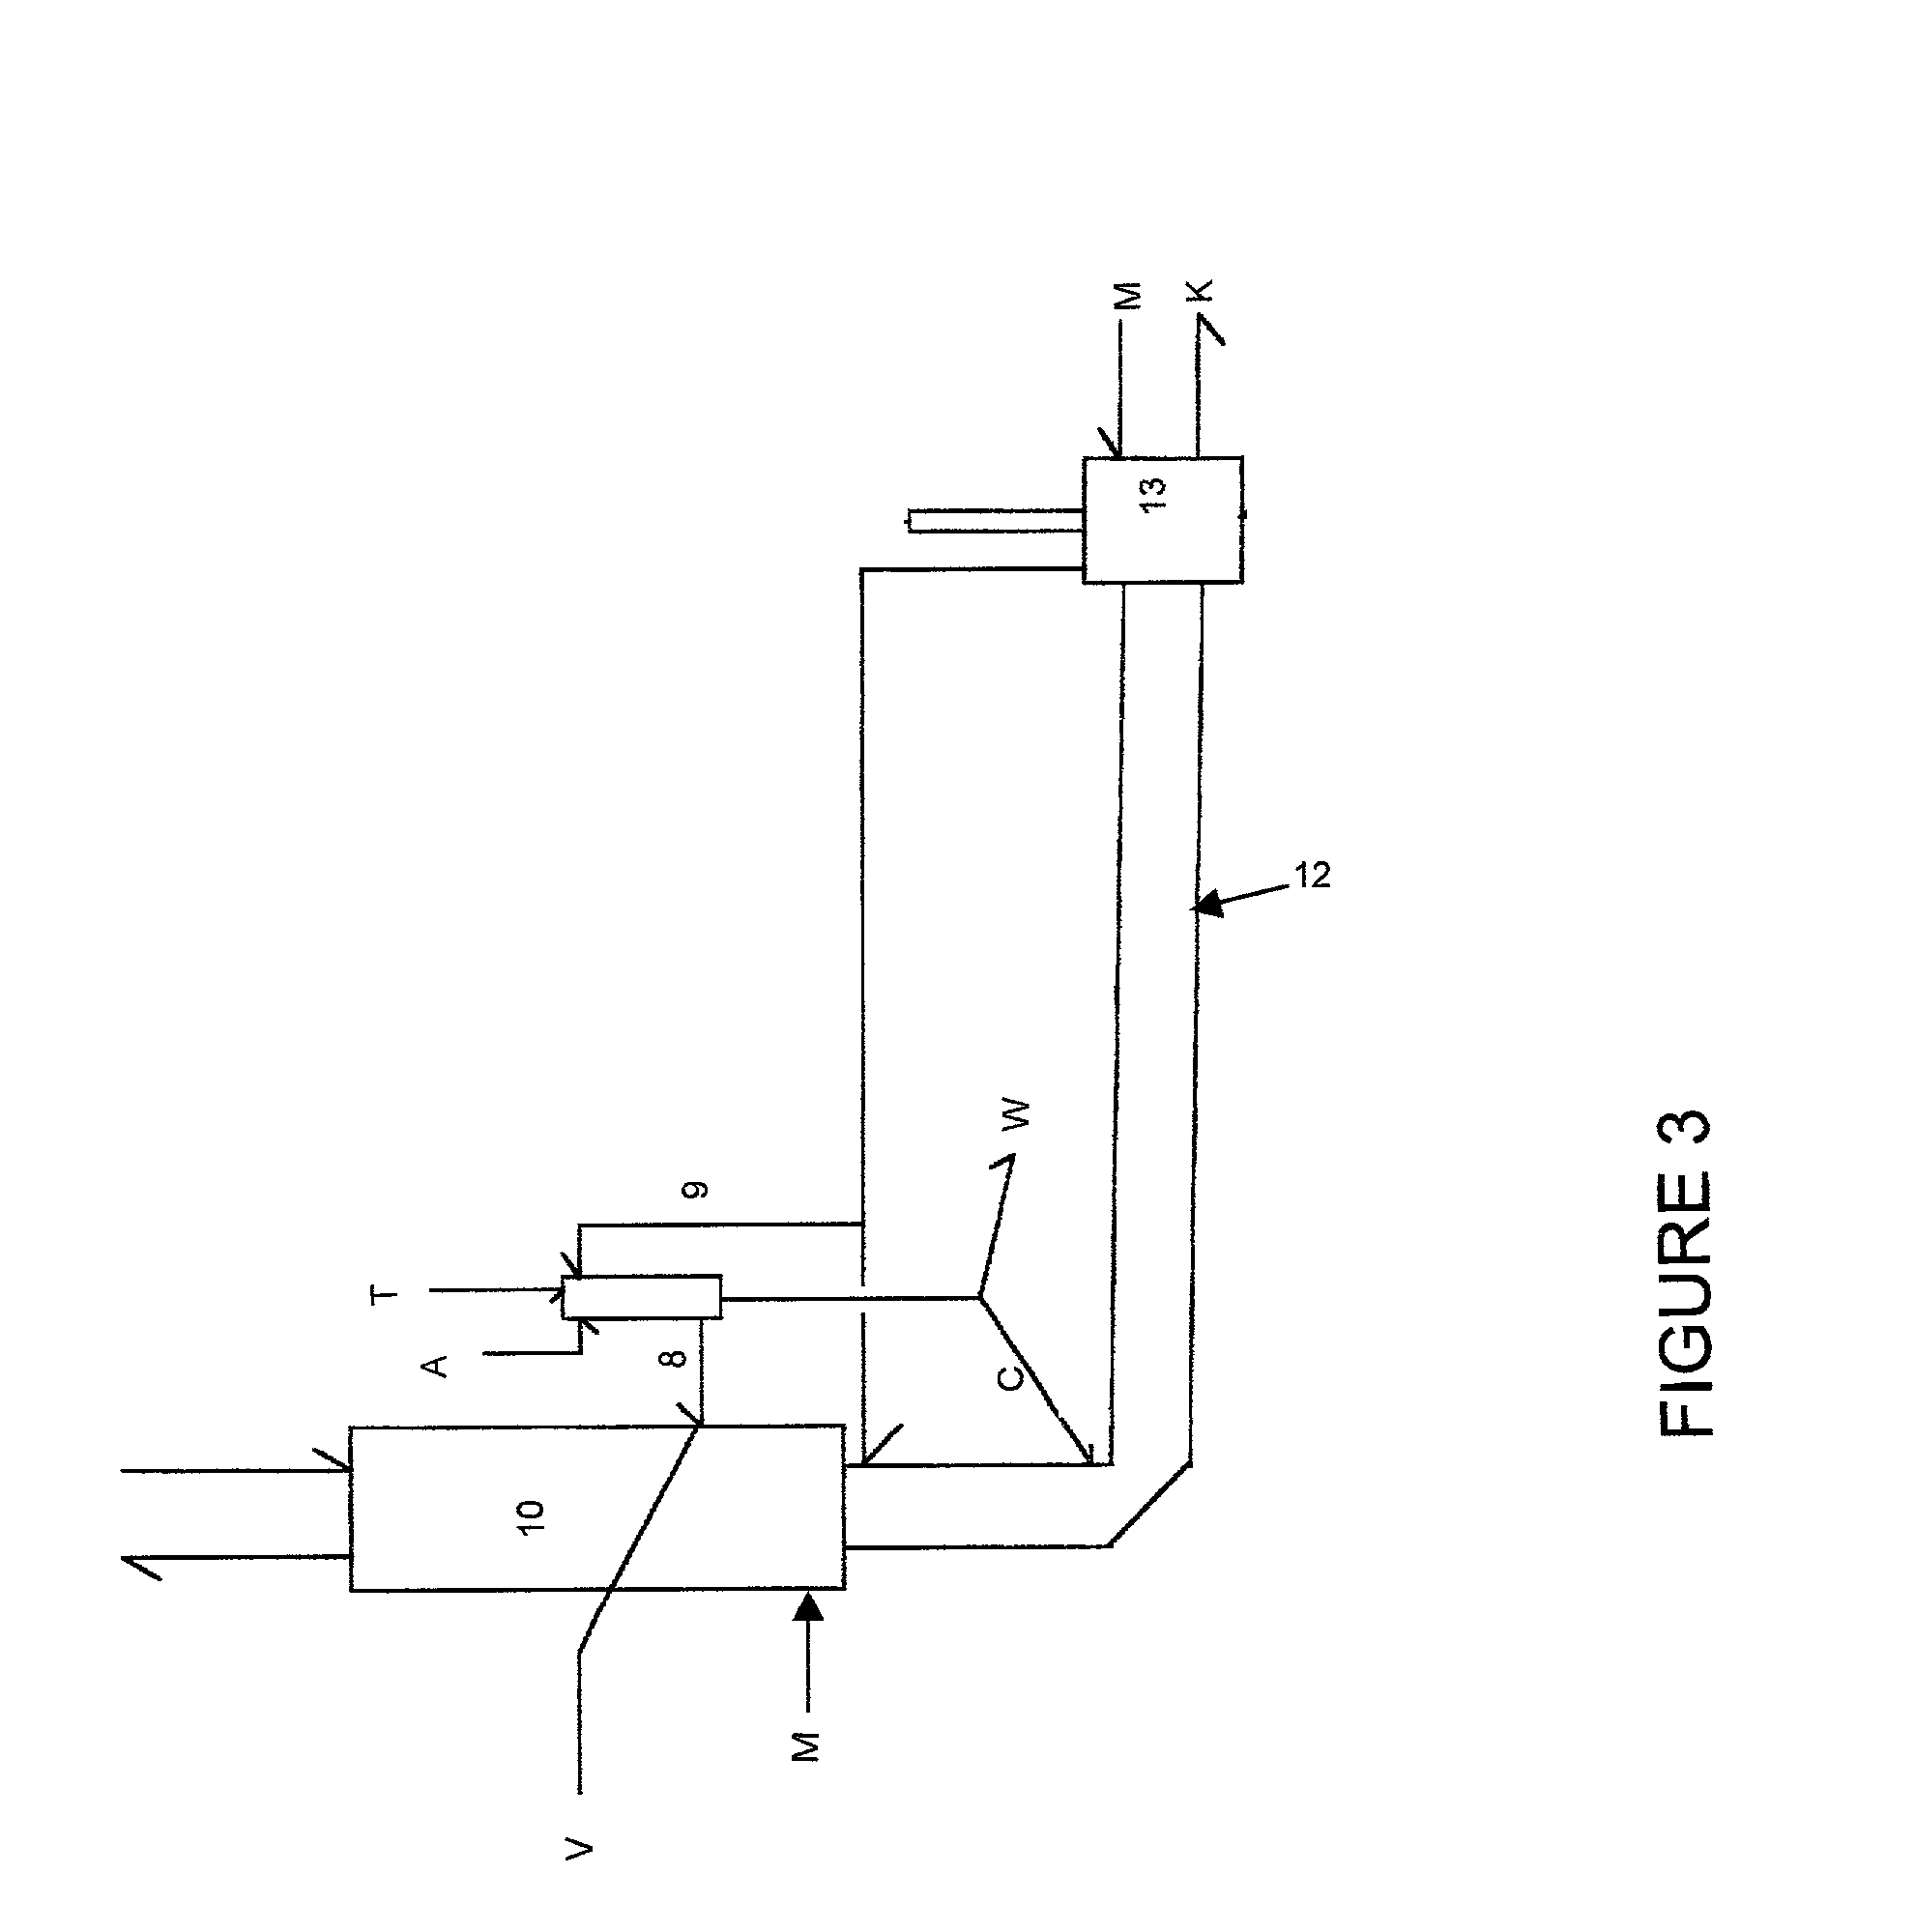 Apparatus and method for fractionating alternative solid fuels